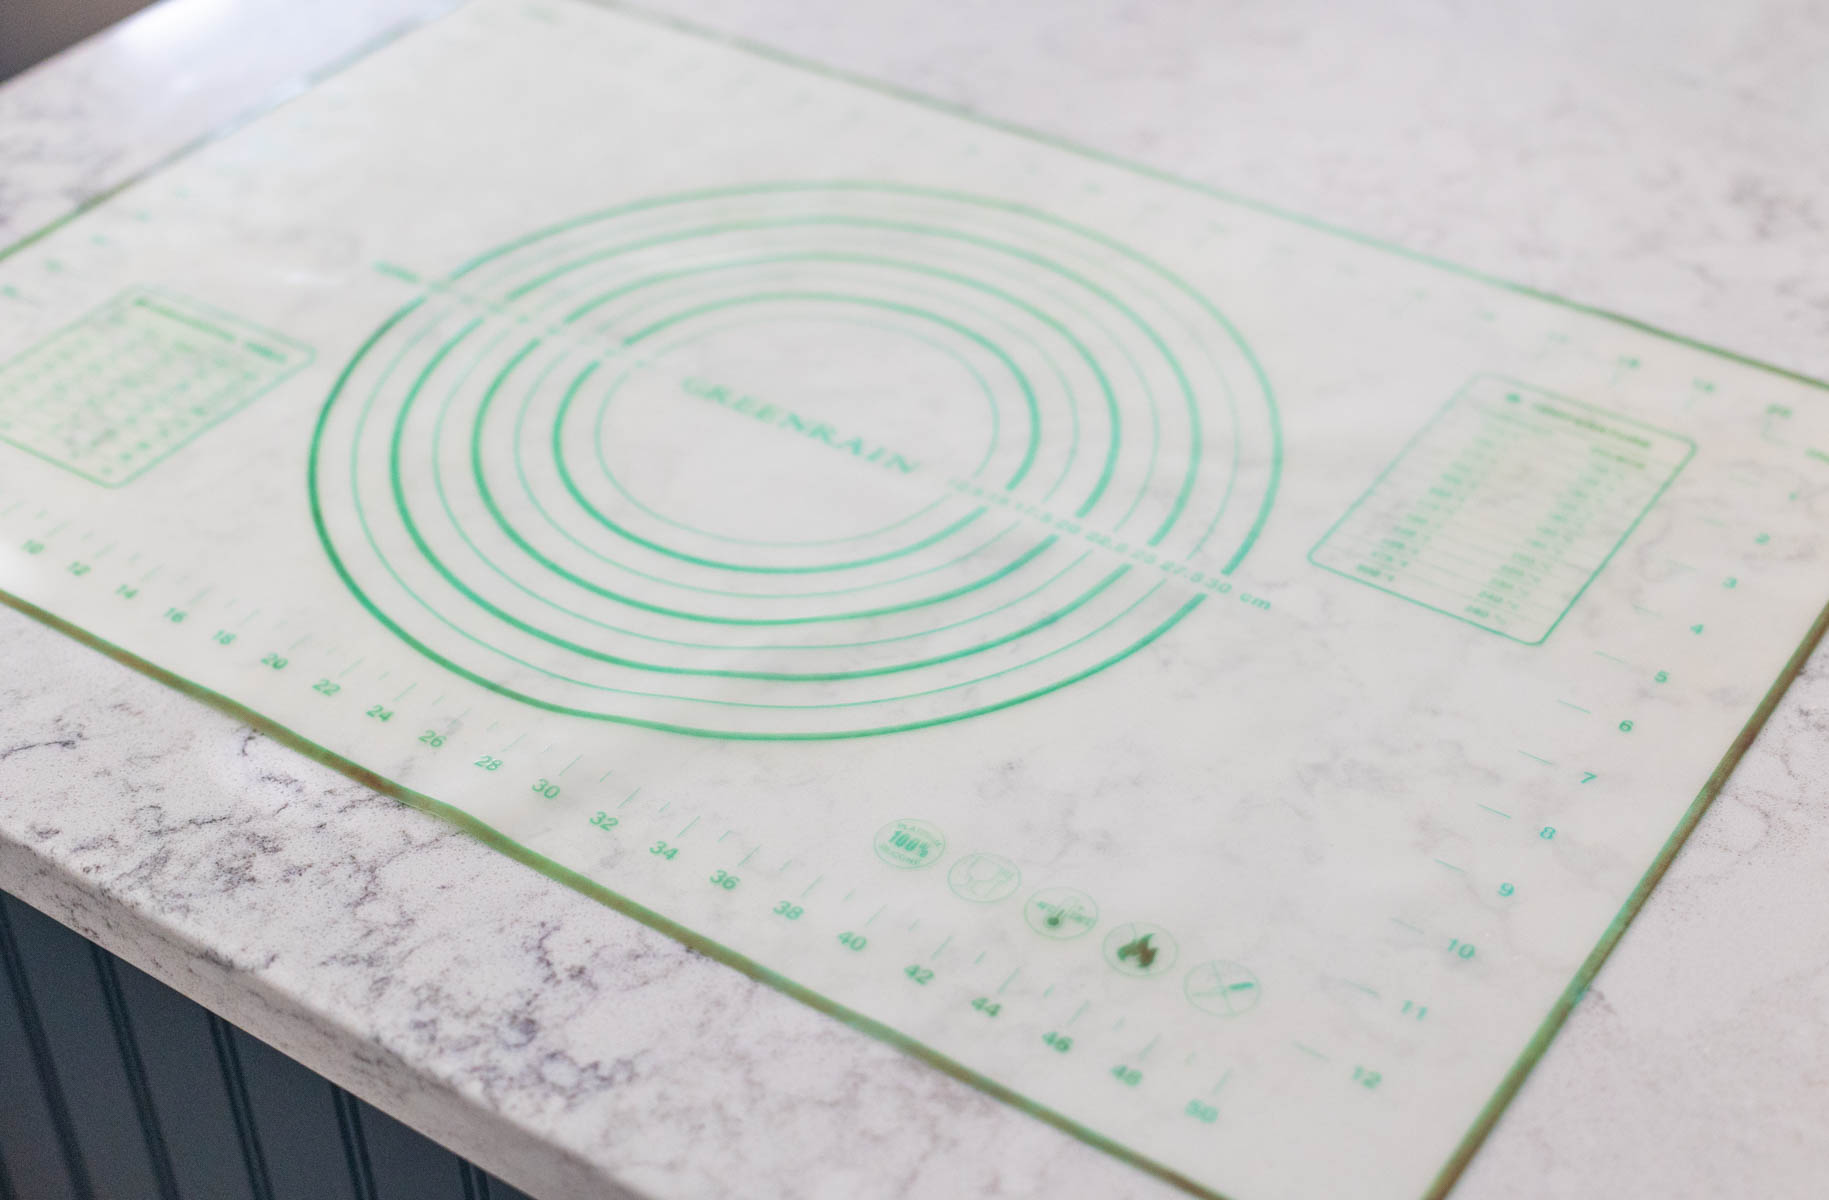 A baking mat with ruler guides for measuring dough as you roll it out is on the counter.